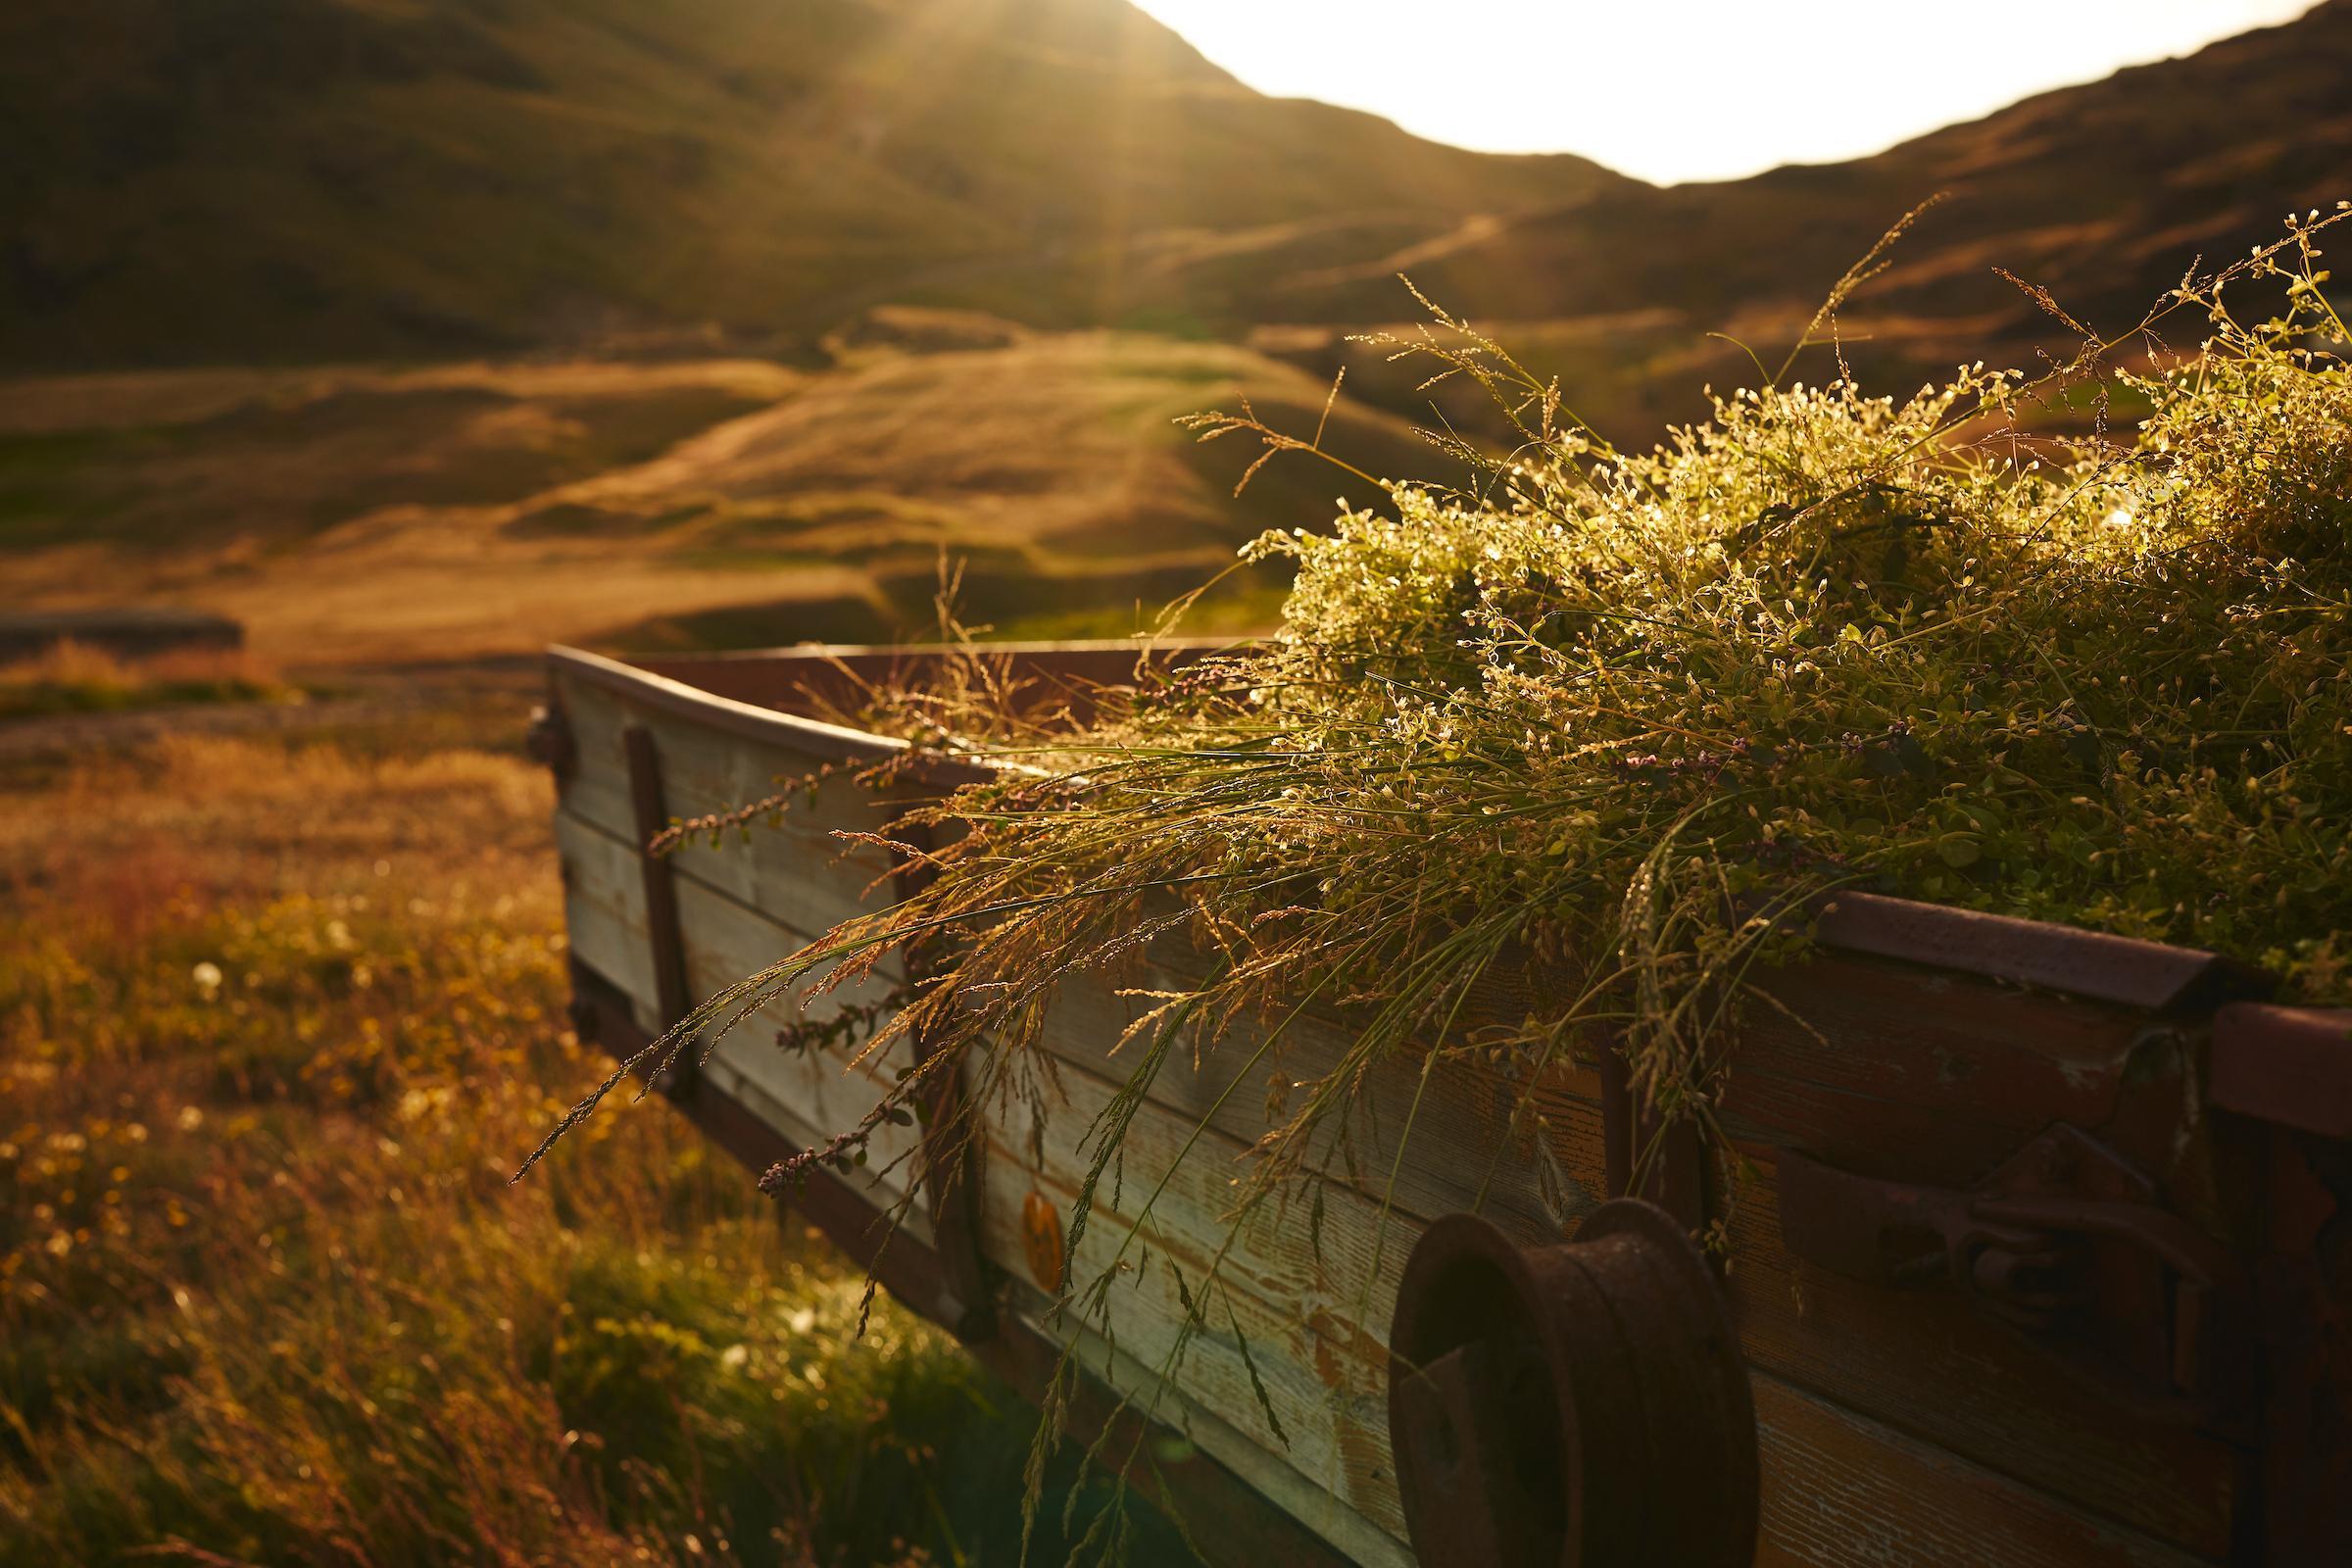 Grass. Photo by Peter Lindstrom - Visit Greenland